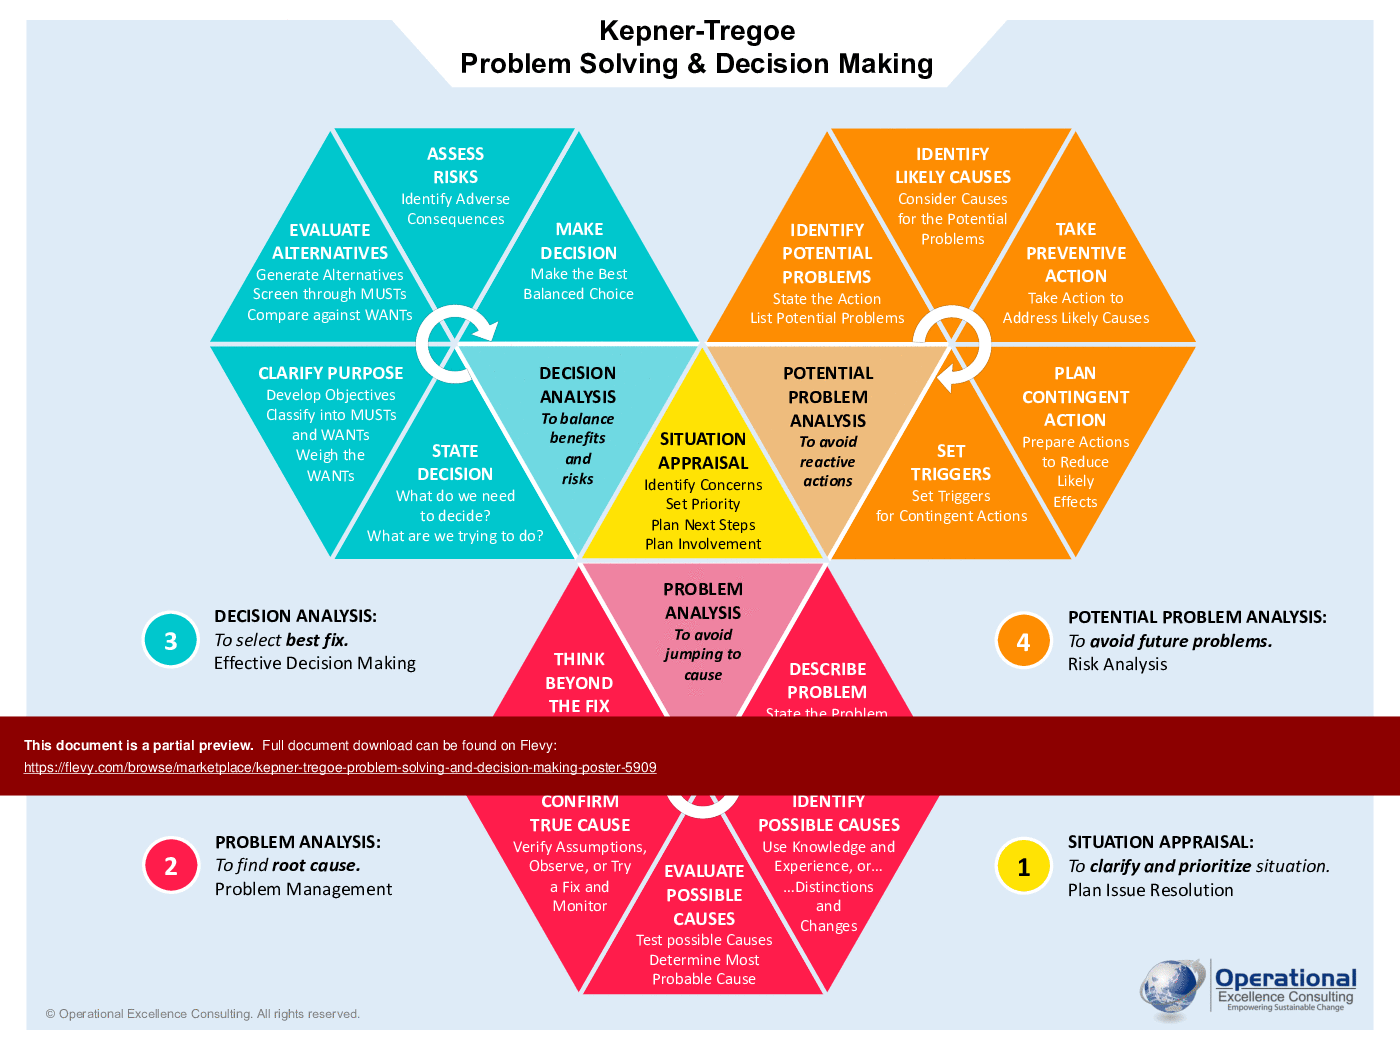 This is a partial preview of Kepner-Tregoe Problem Solving & Decision Making Poster (7-page PDF document). Full document is 7 pages. 